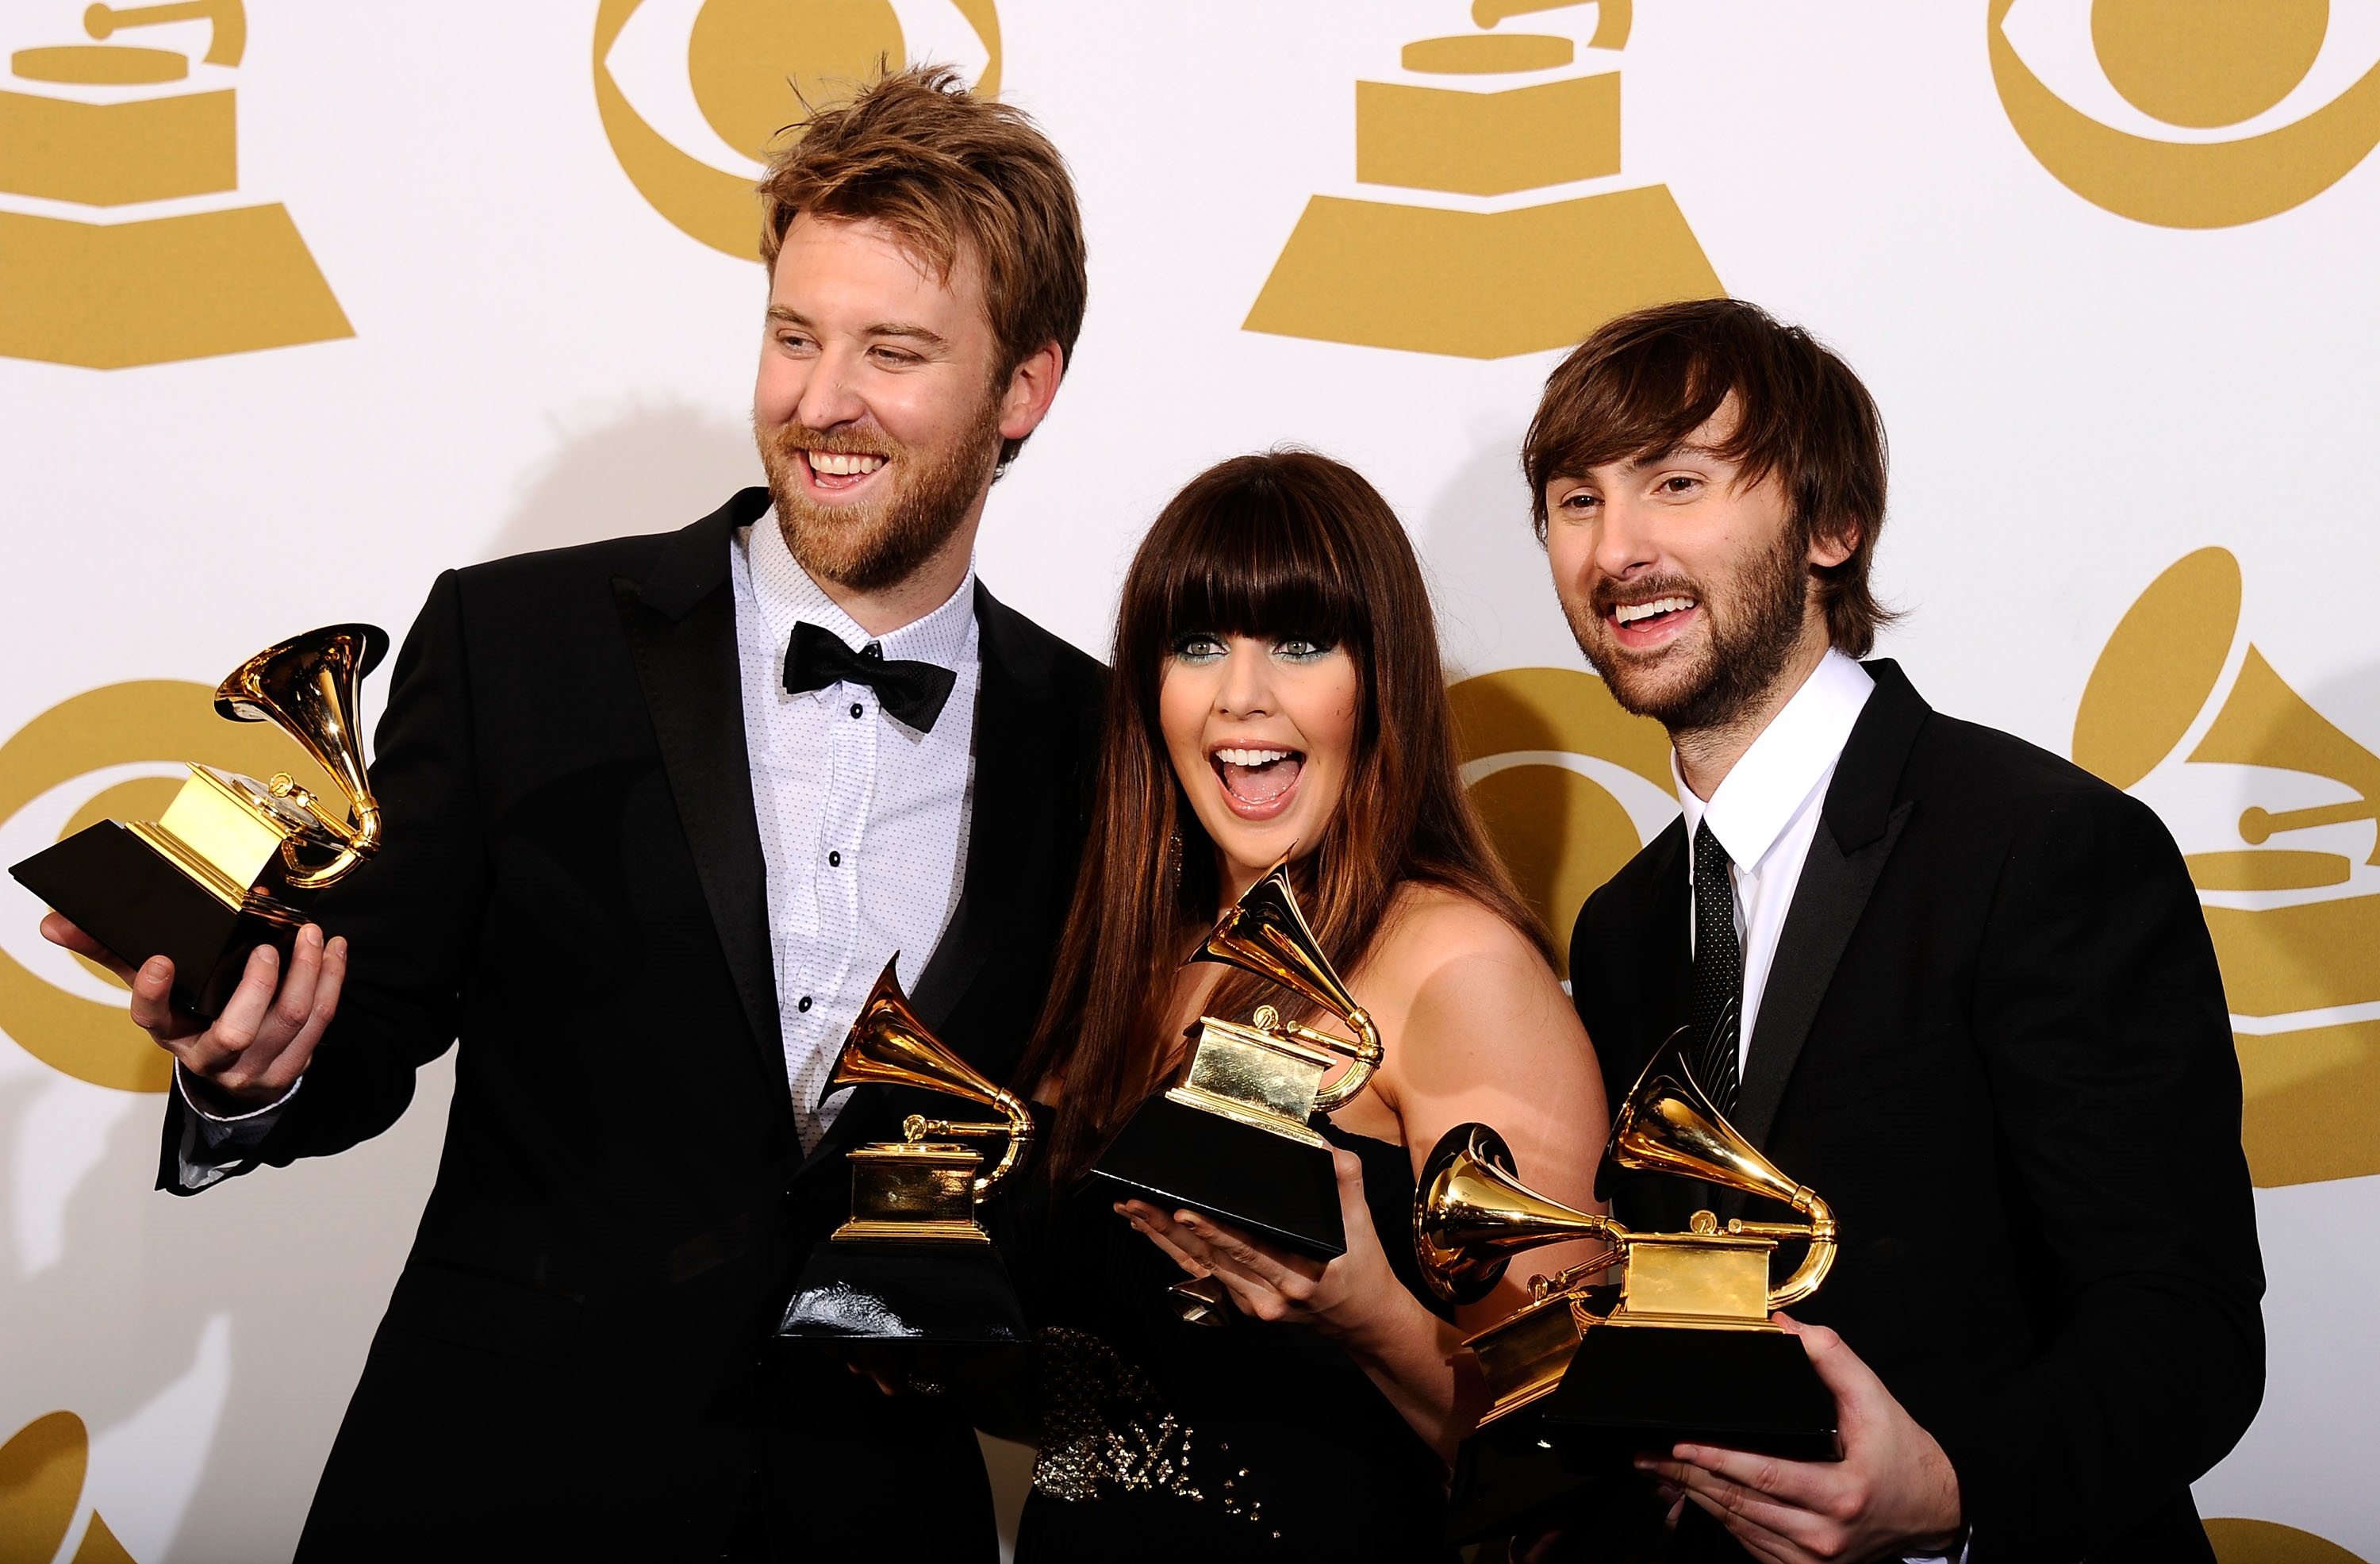 The 53rd Annual GRAMMY Awards - Press Room Sounds Like ...